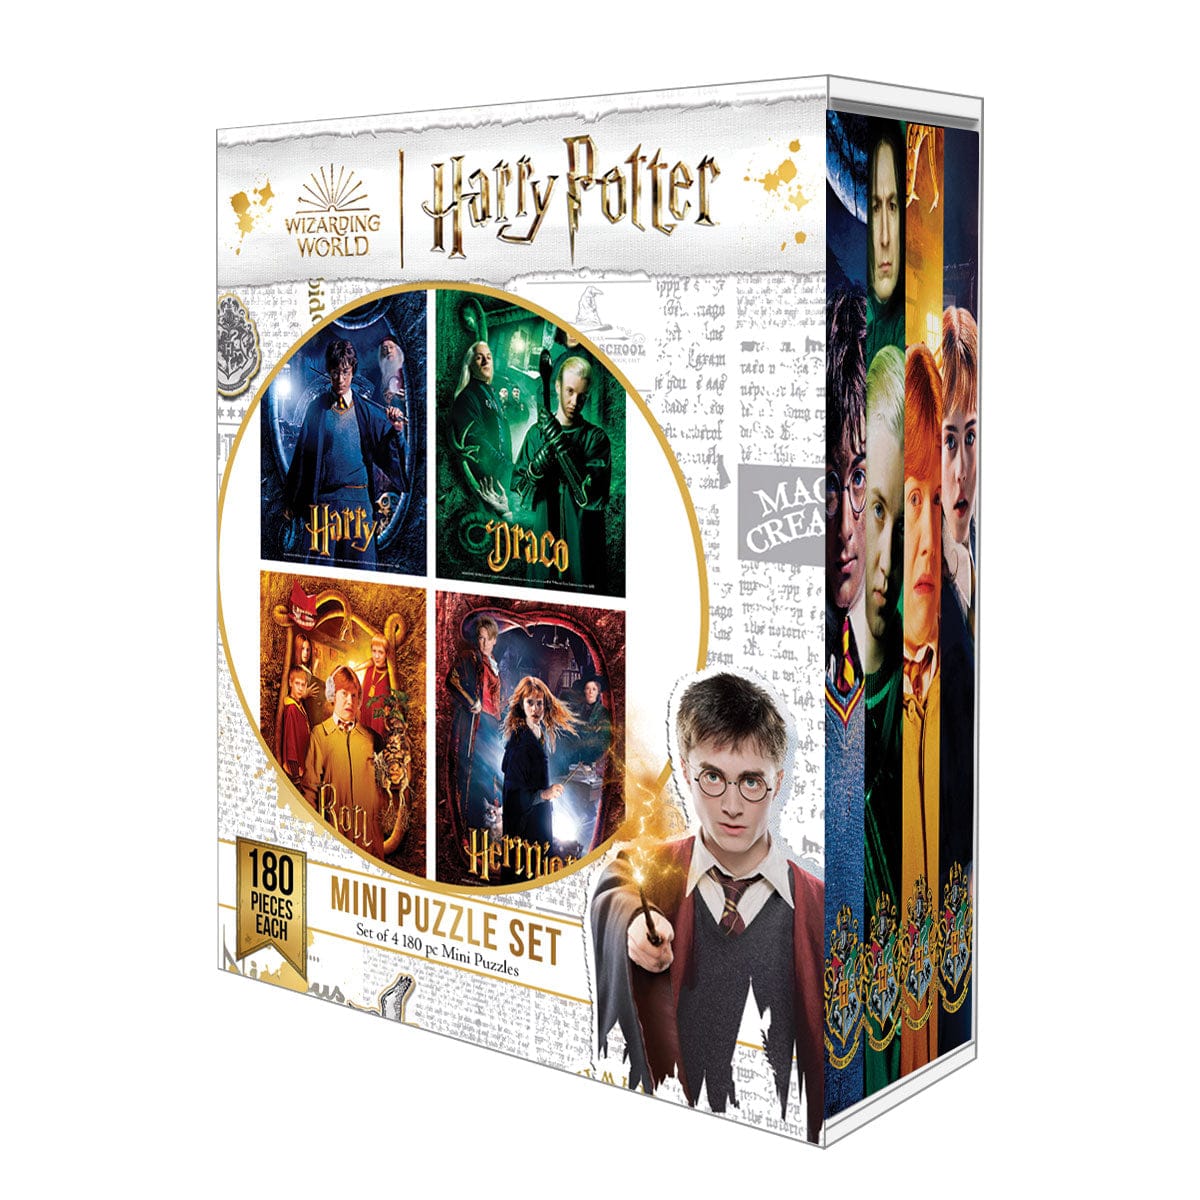 Harry Potter Gift Set - Movie Posters